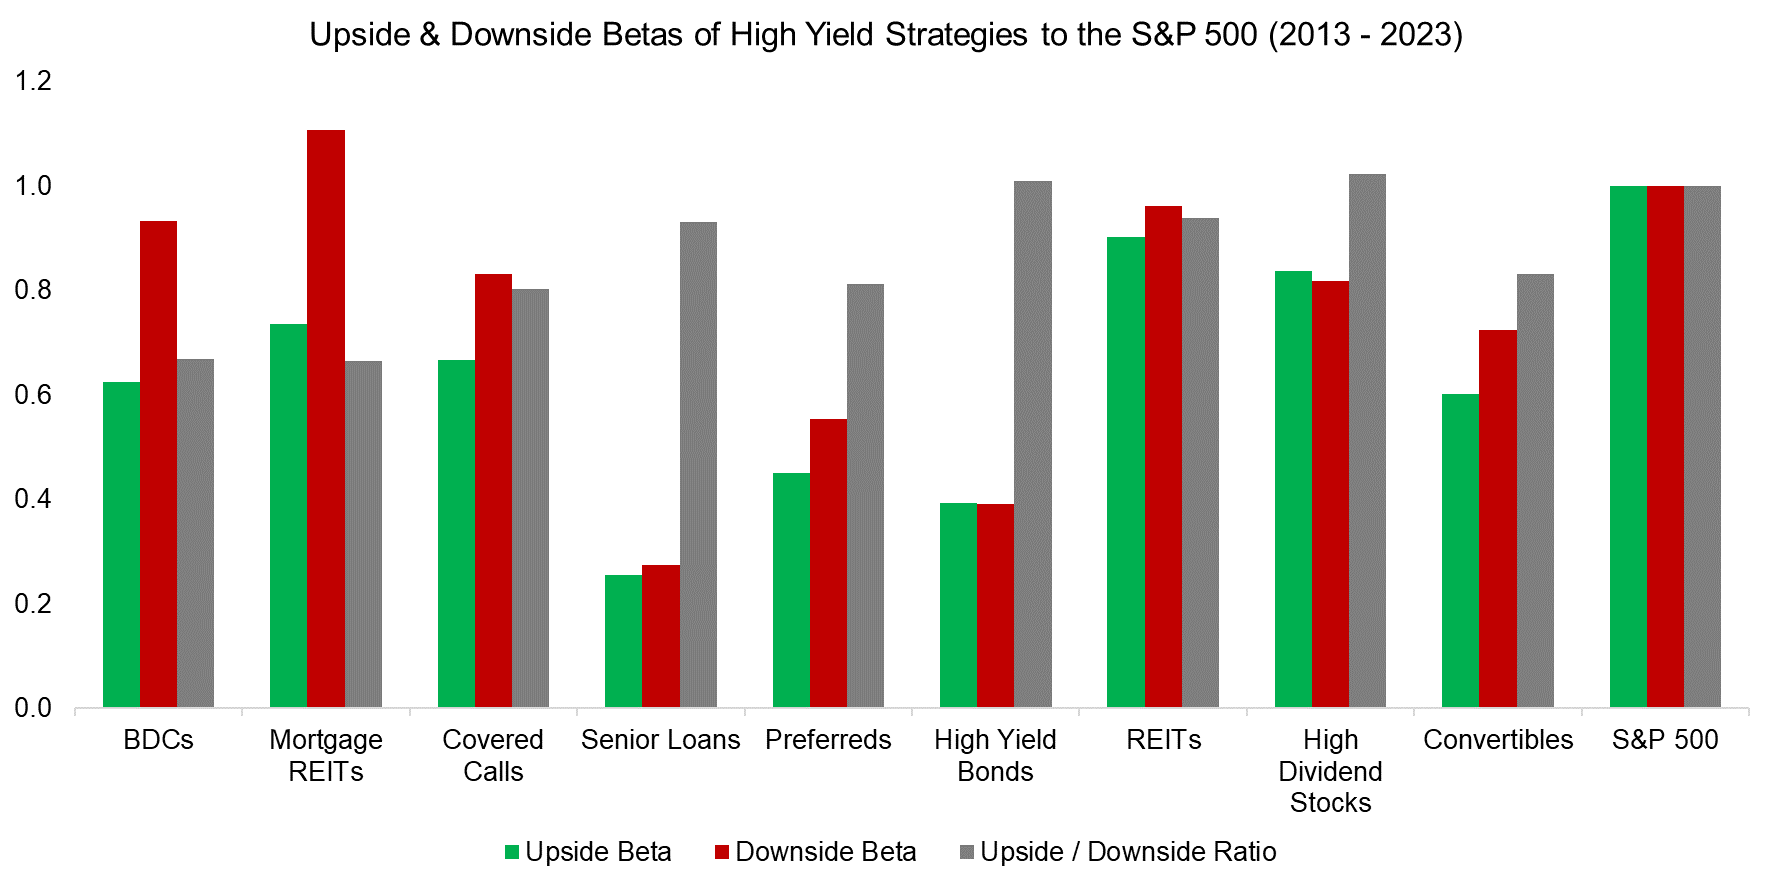 Upside & Downside Betas of High Yield Strategies to the S&P 500 (2013 - 2023)